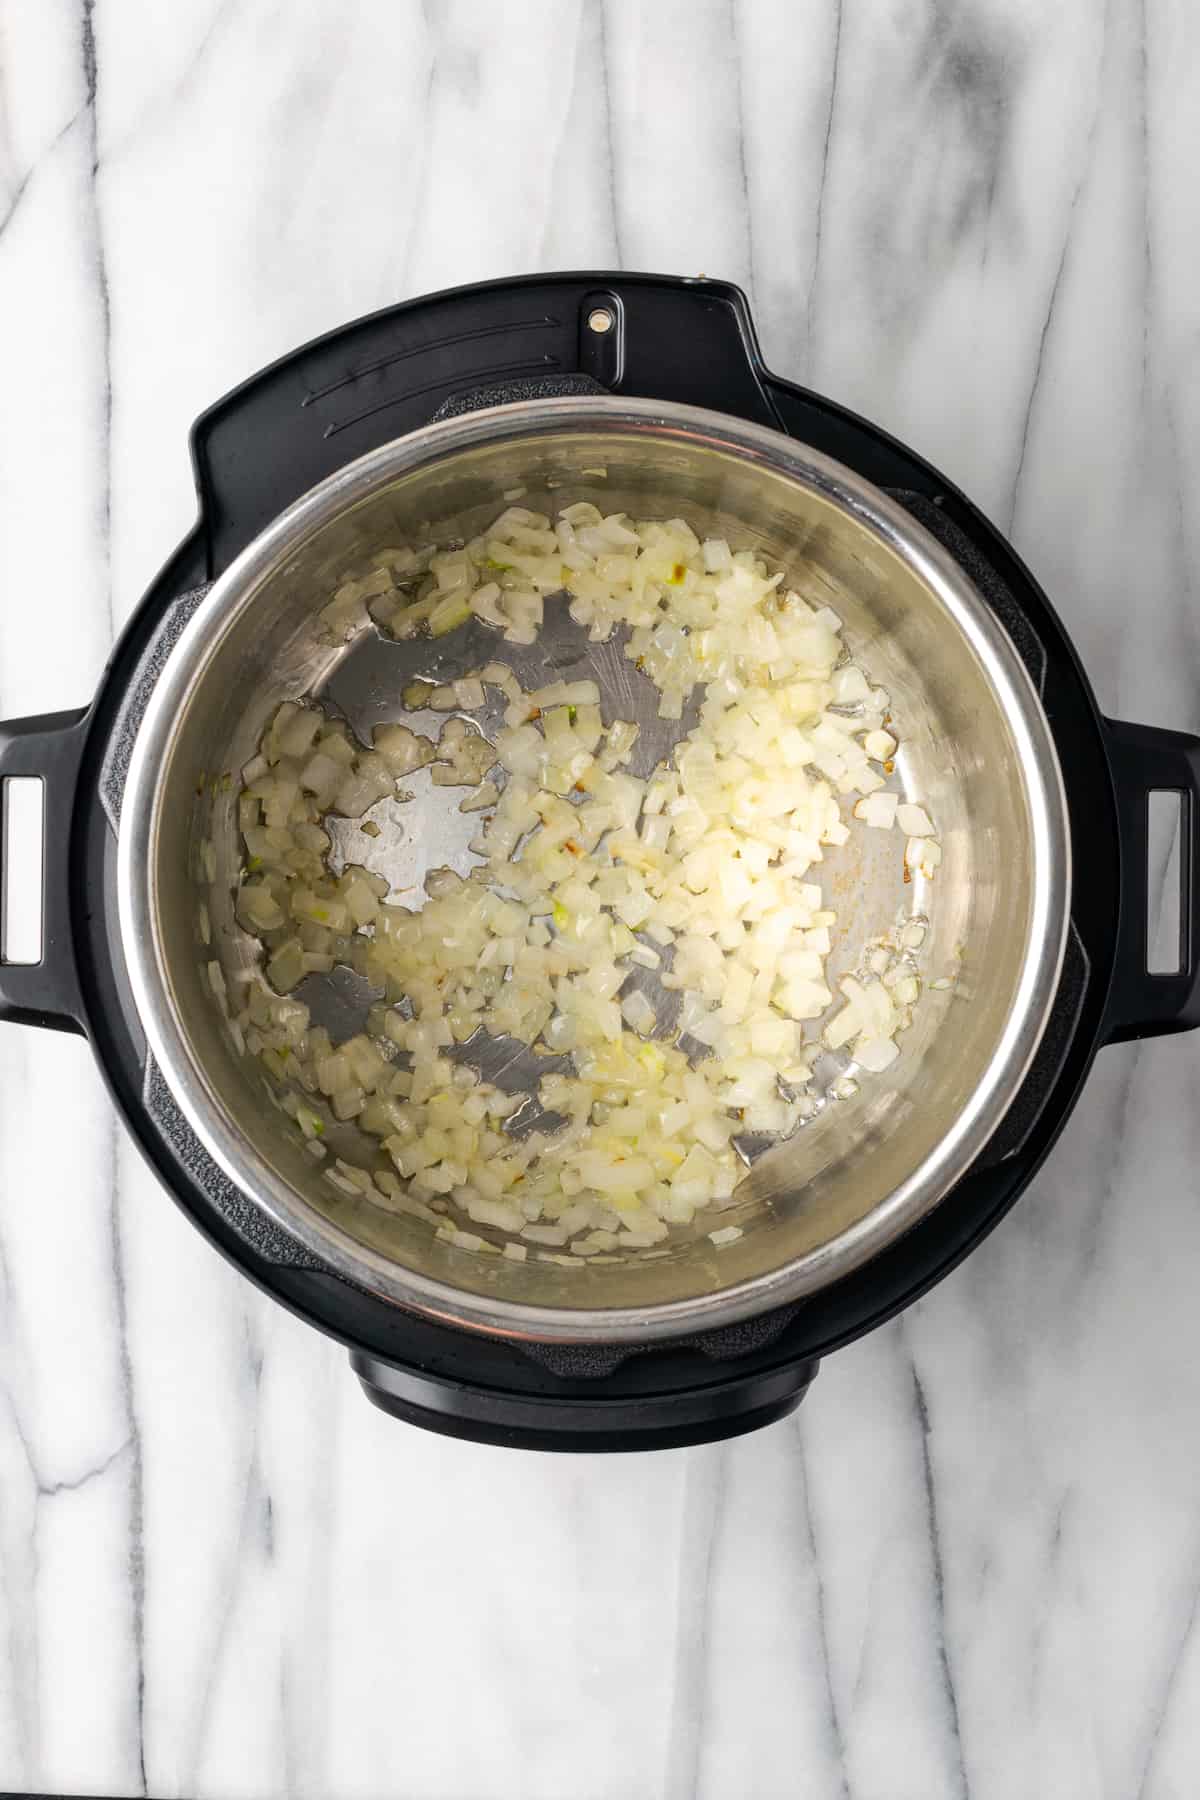 An Instant Pot with diced onions cooking in it